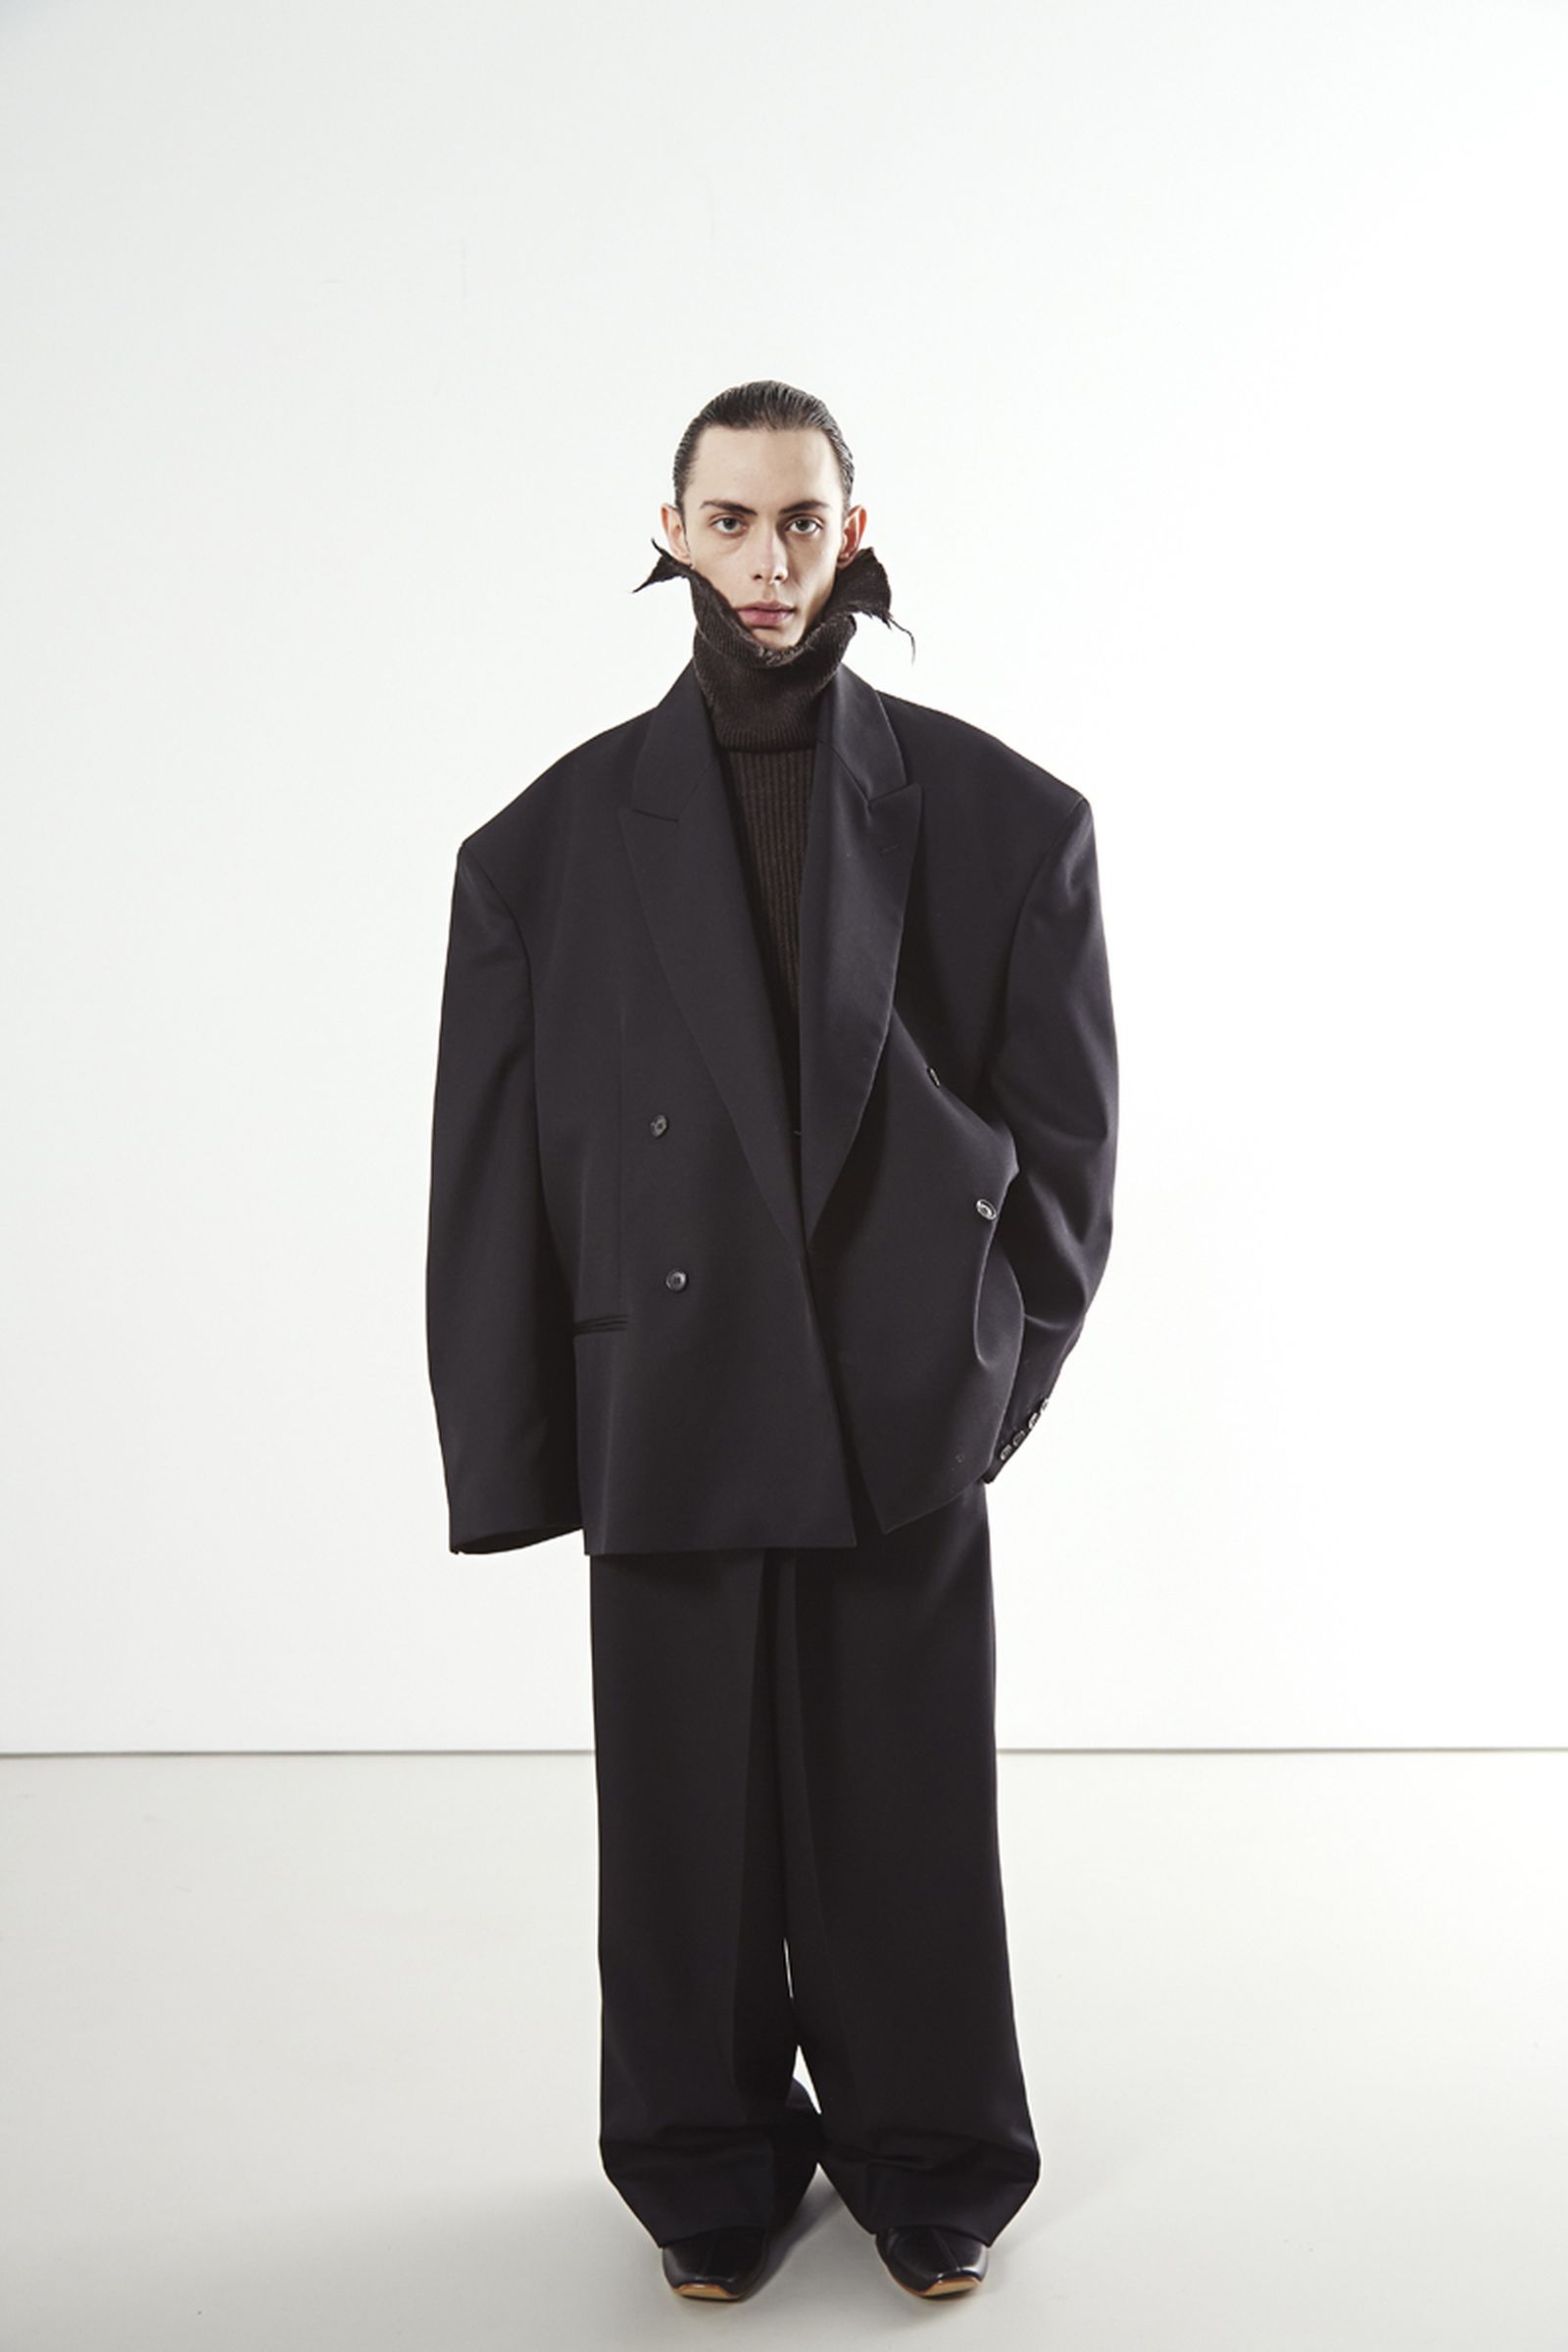 hed-mayner-fw22-collection-lookbook- (13)